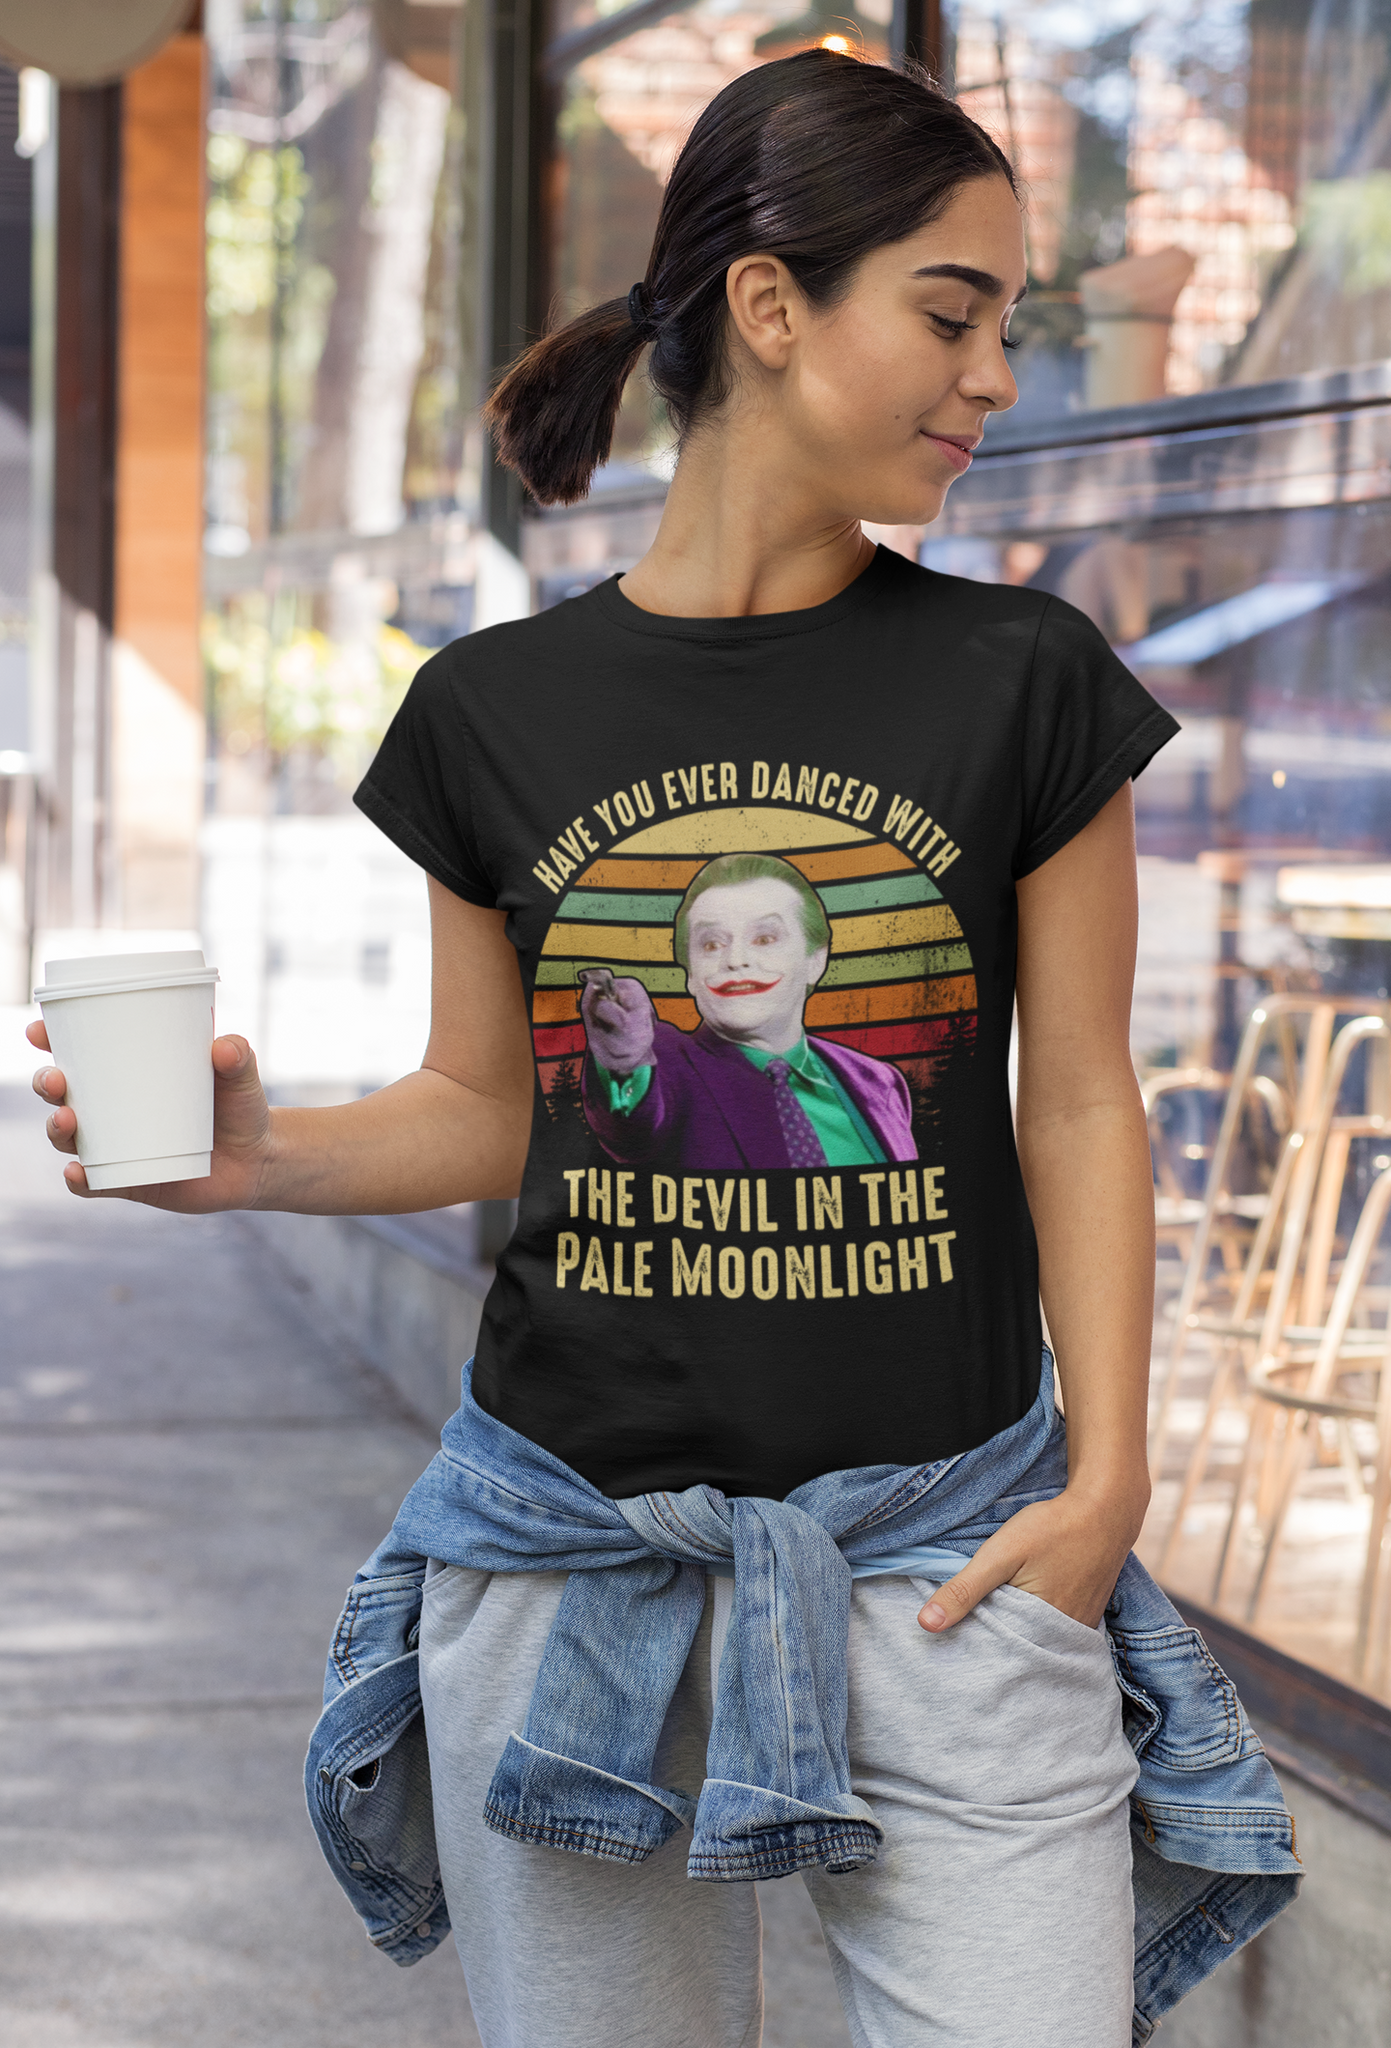 Joker T Shirt, Joker The Clown Tshirt, Have You Ever Danced With The Devil In The Pale Moonlight Shirt, Halloween Gifts